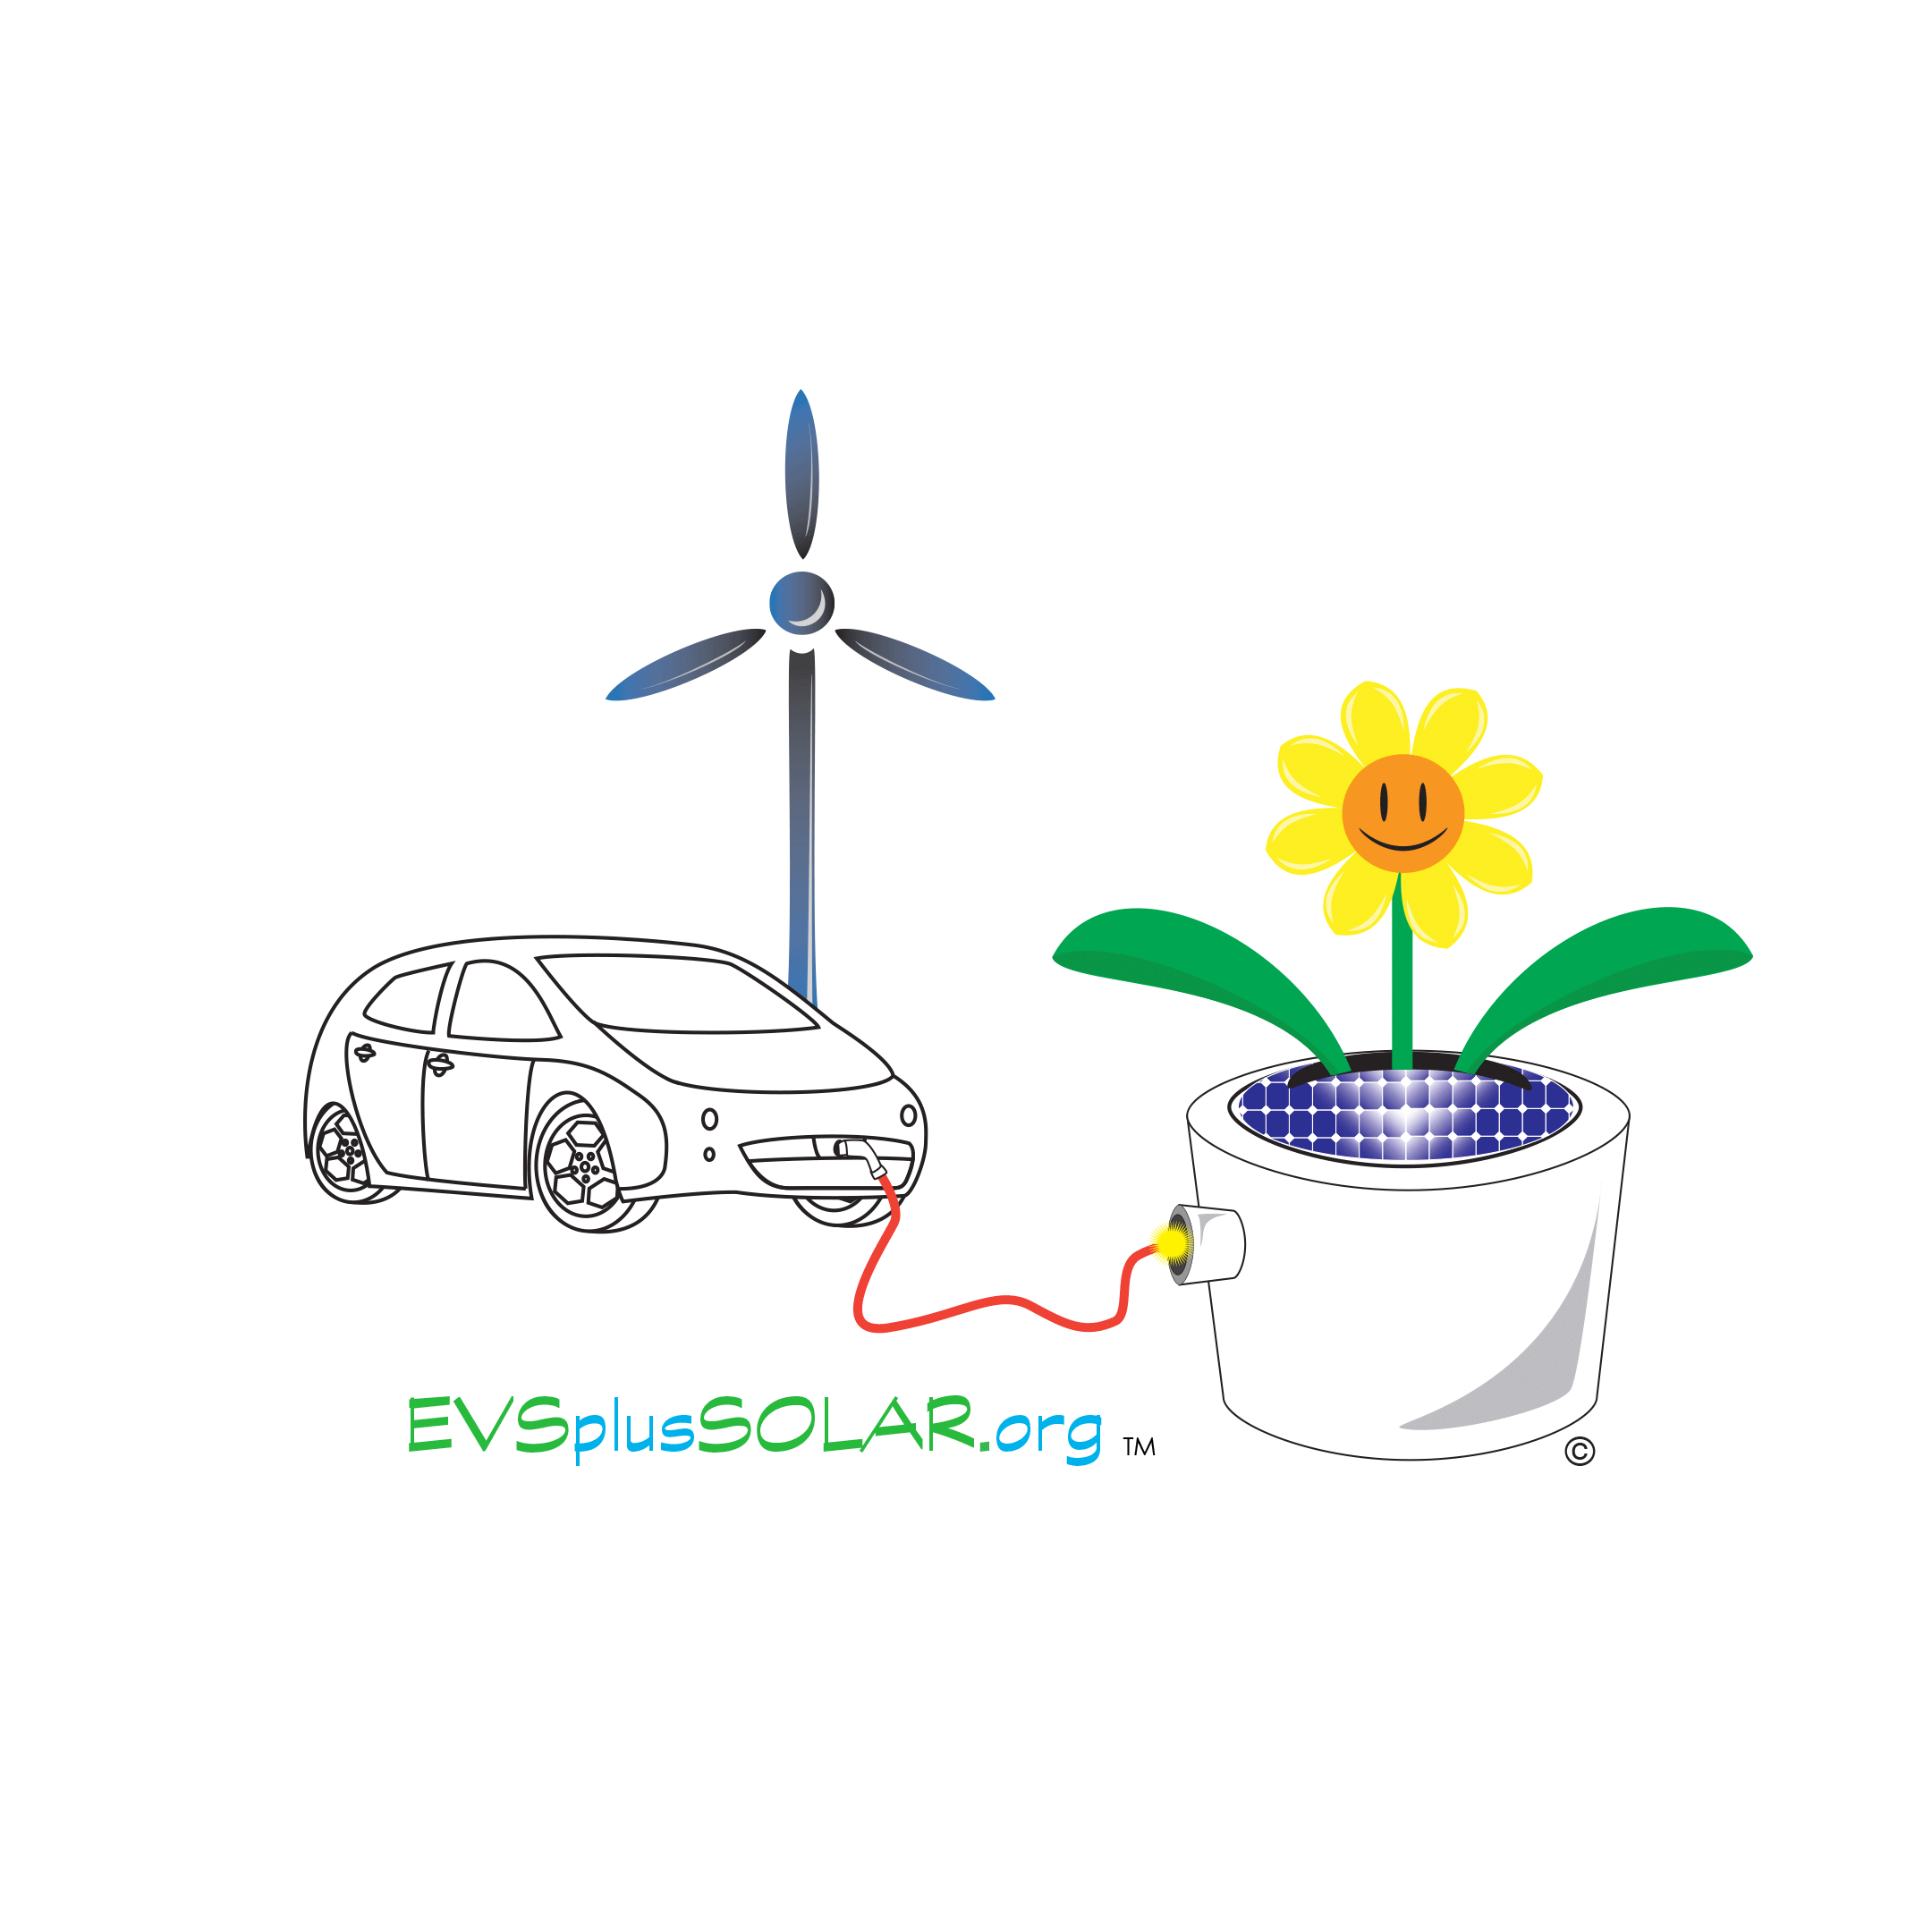 Electric vehicles plus Solar, Wind and Wave power